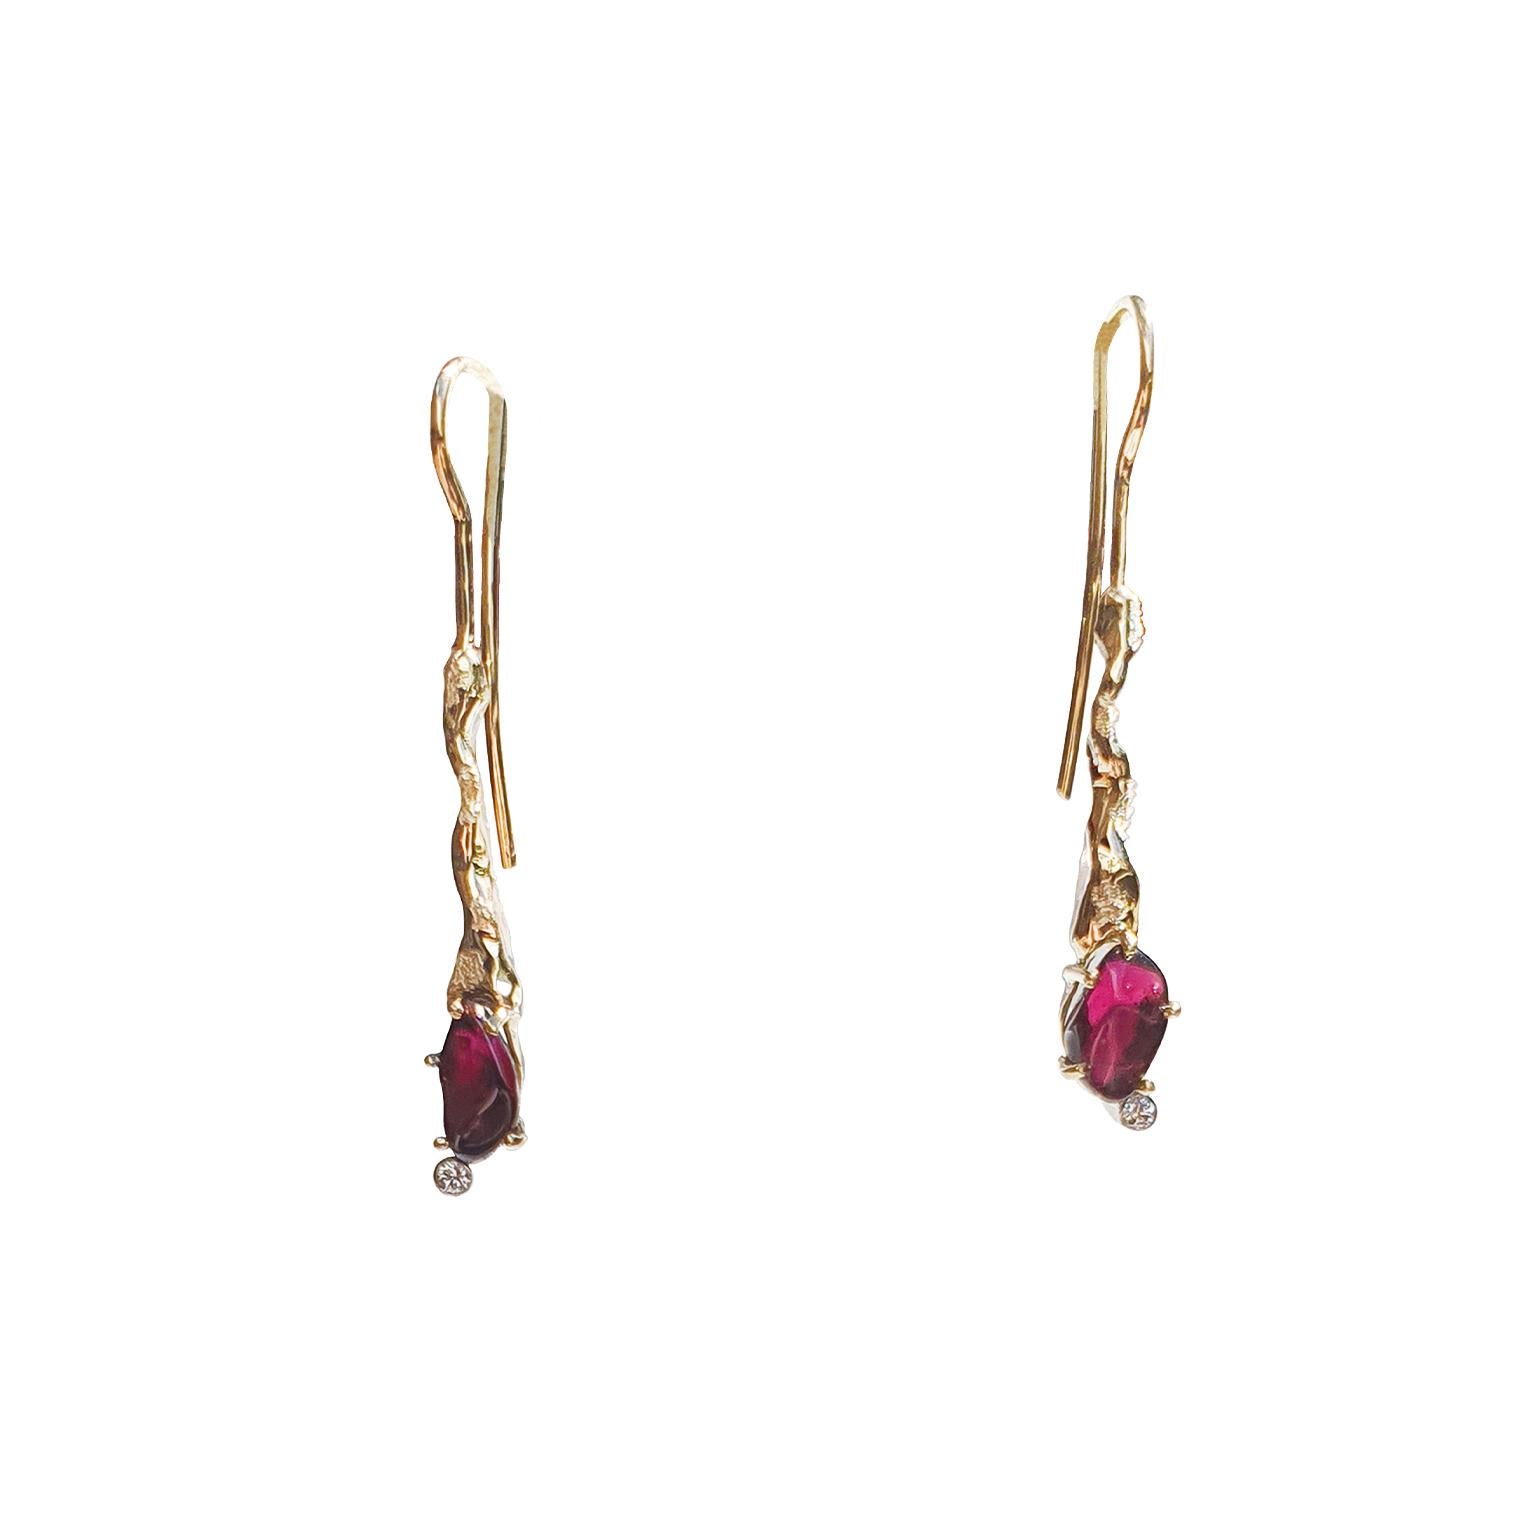 Artisan Paul Amey 18k Gold, Diamond and Natural Garnet Earring and Pendant Set For Sale